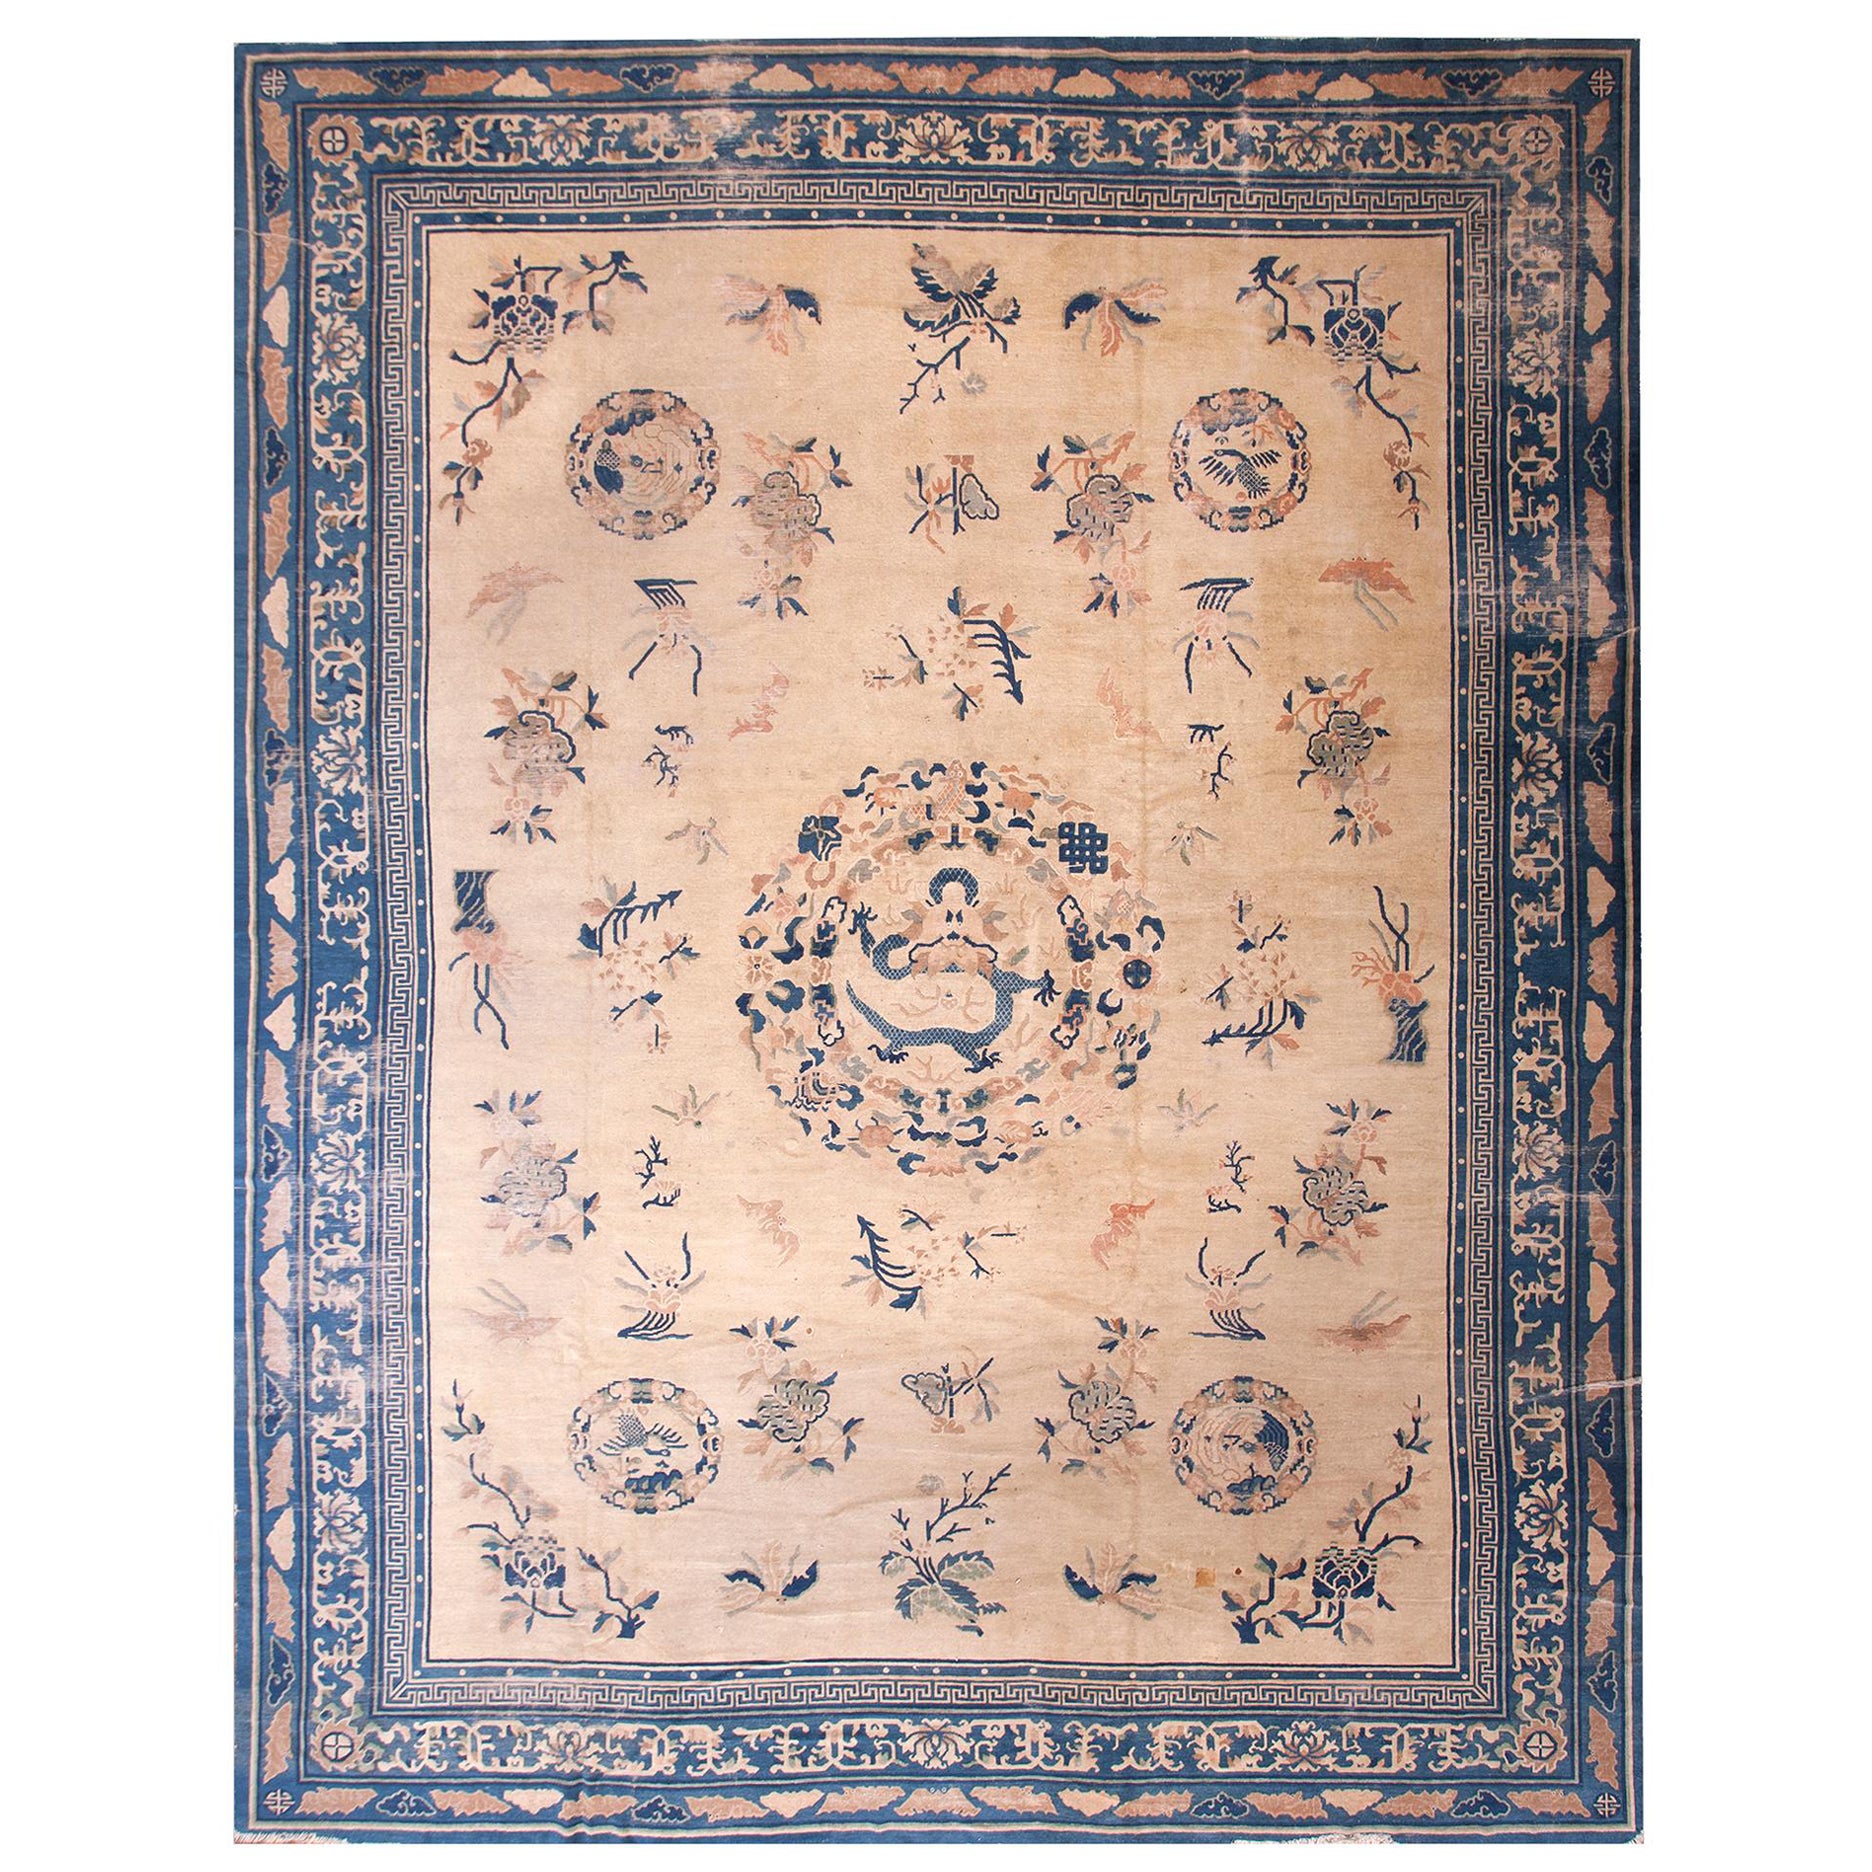 Early 20th Century Chinese Peking Dragon Carpet ( 12'8" x 16'4" - 386 x 498 ) For Sale